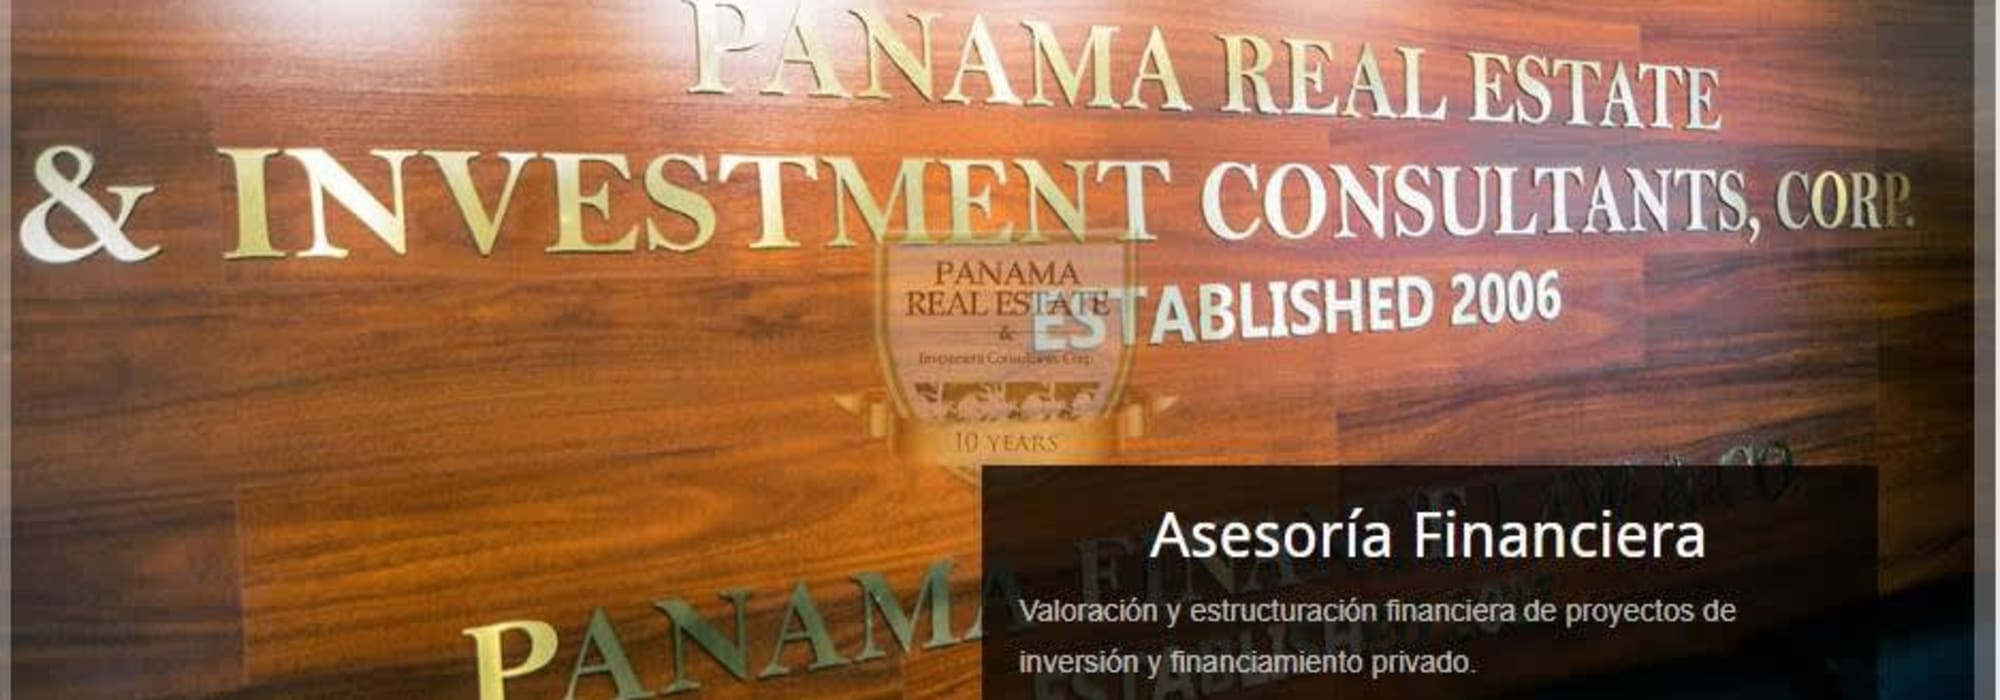 Panama Real Estate & Investment Consultants, Corp.